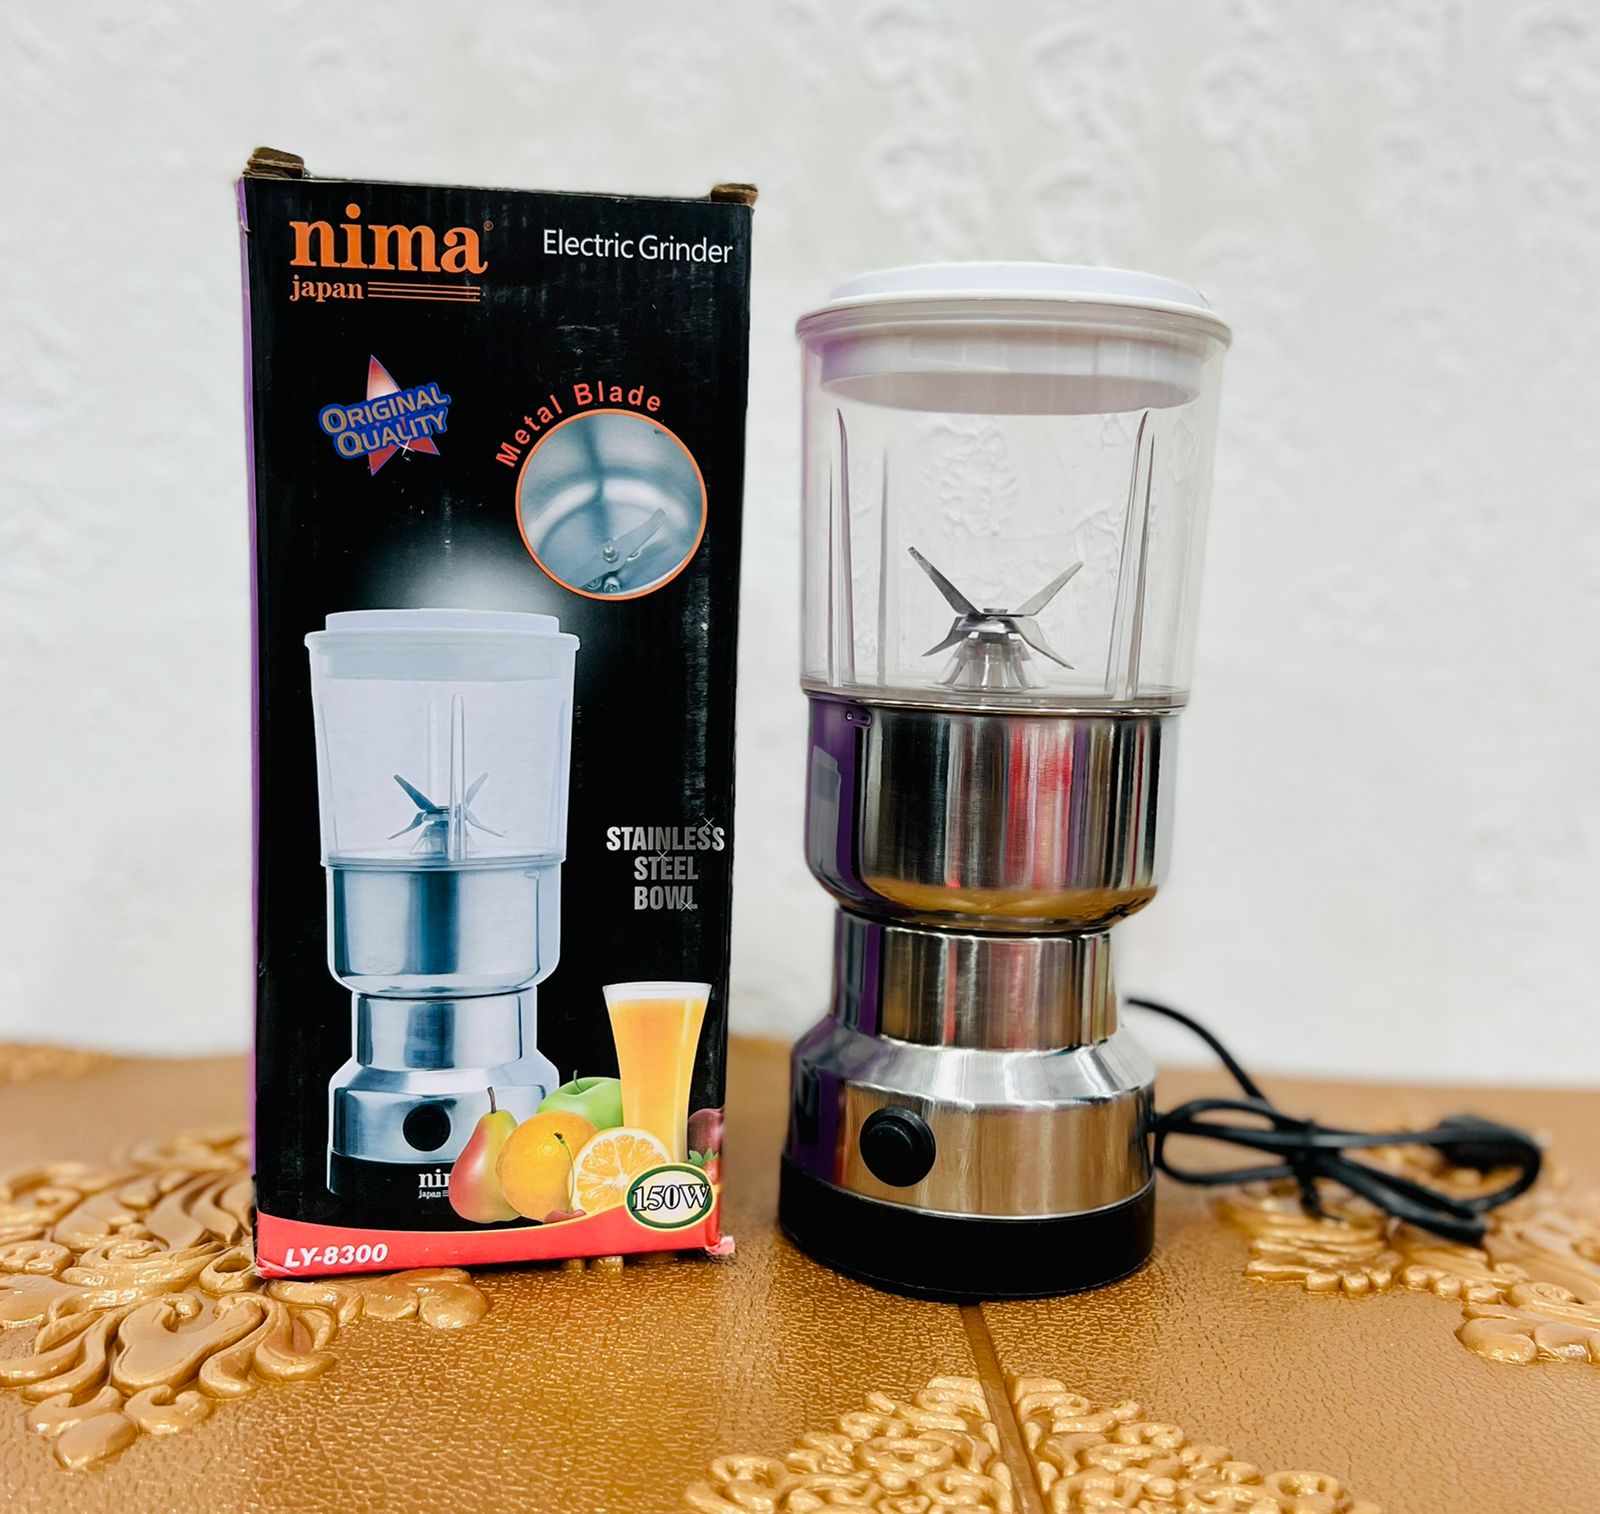 Nima 2 in 1 Electric Spice Grinder and Juicer - Silver